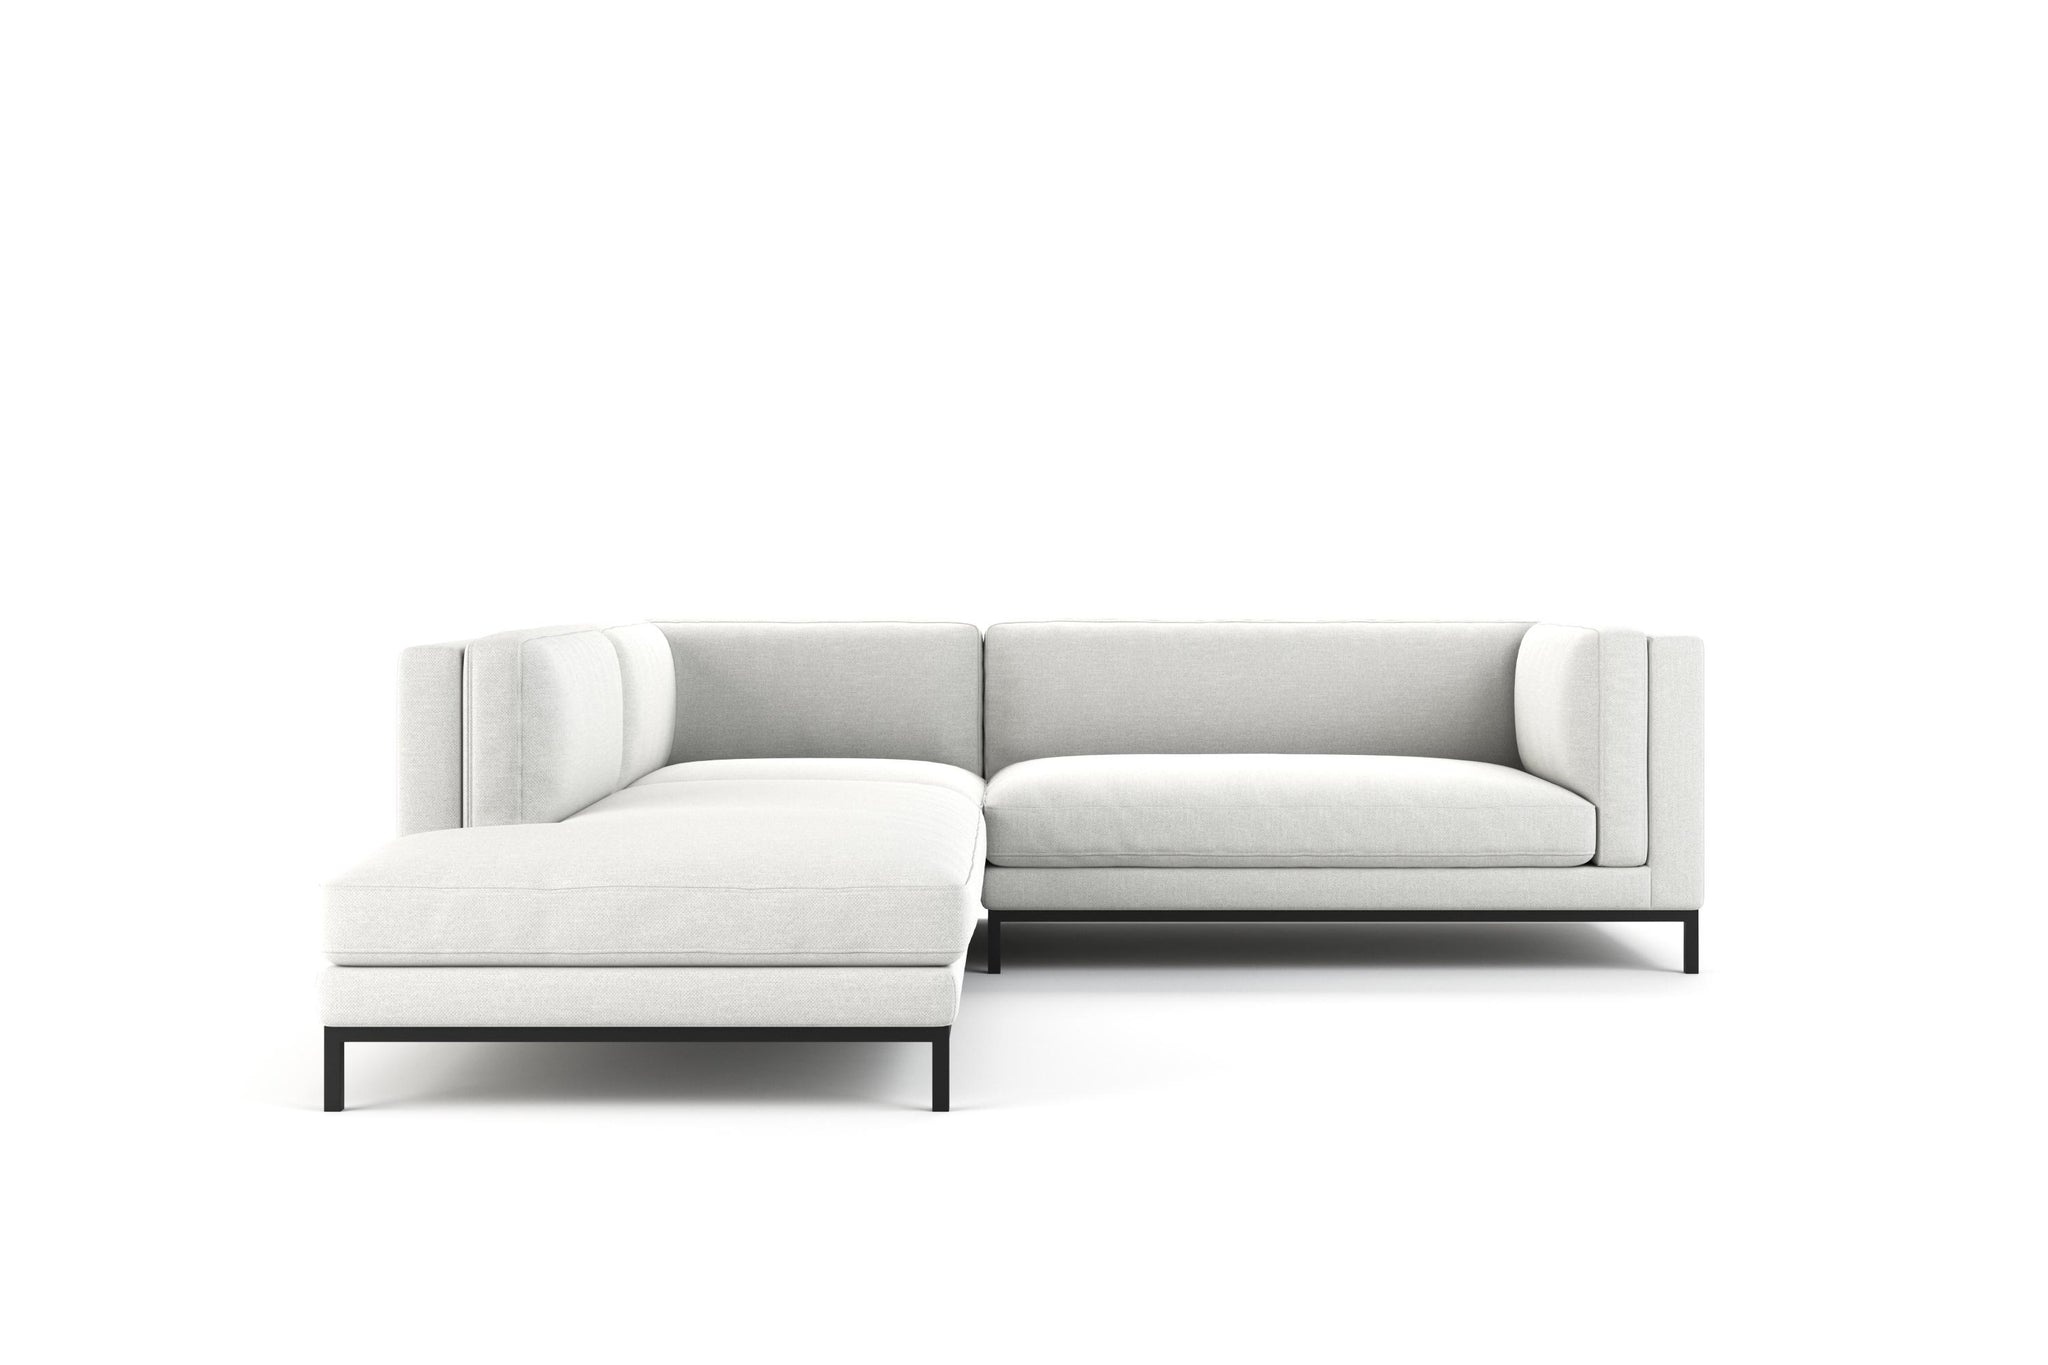 Palo Alto Sectional with Bumper